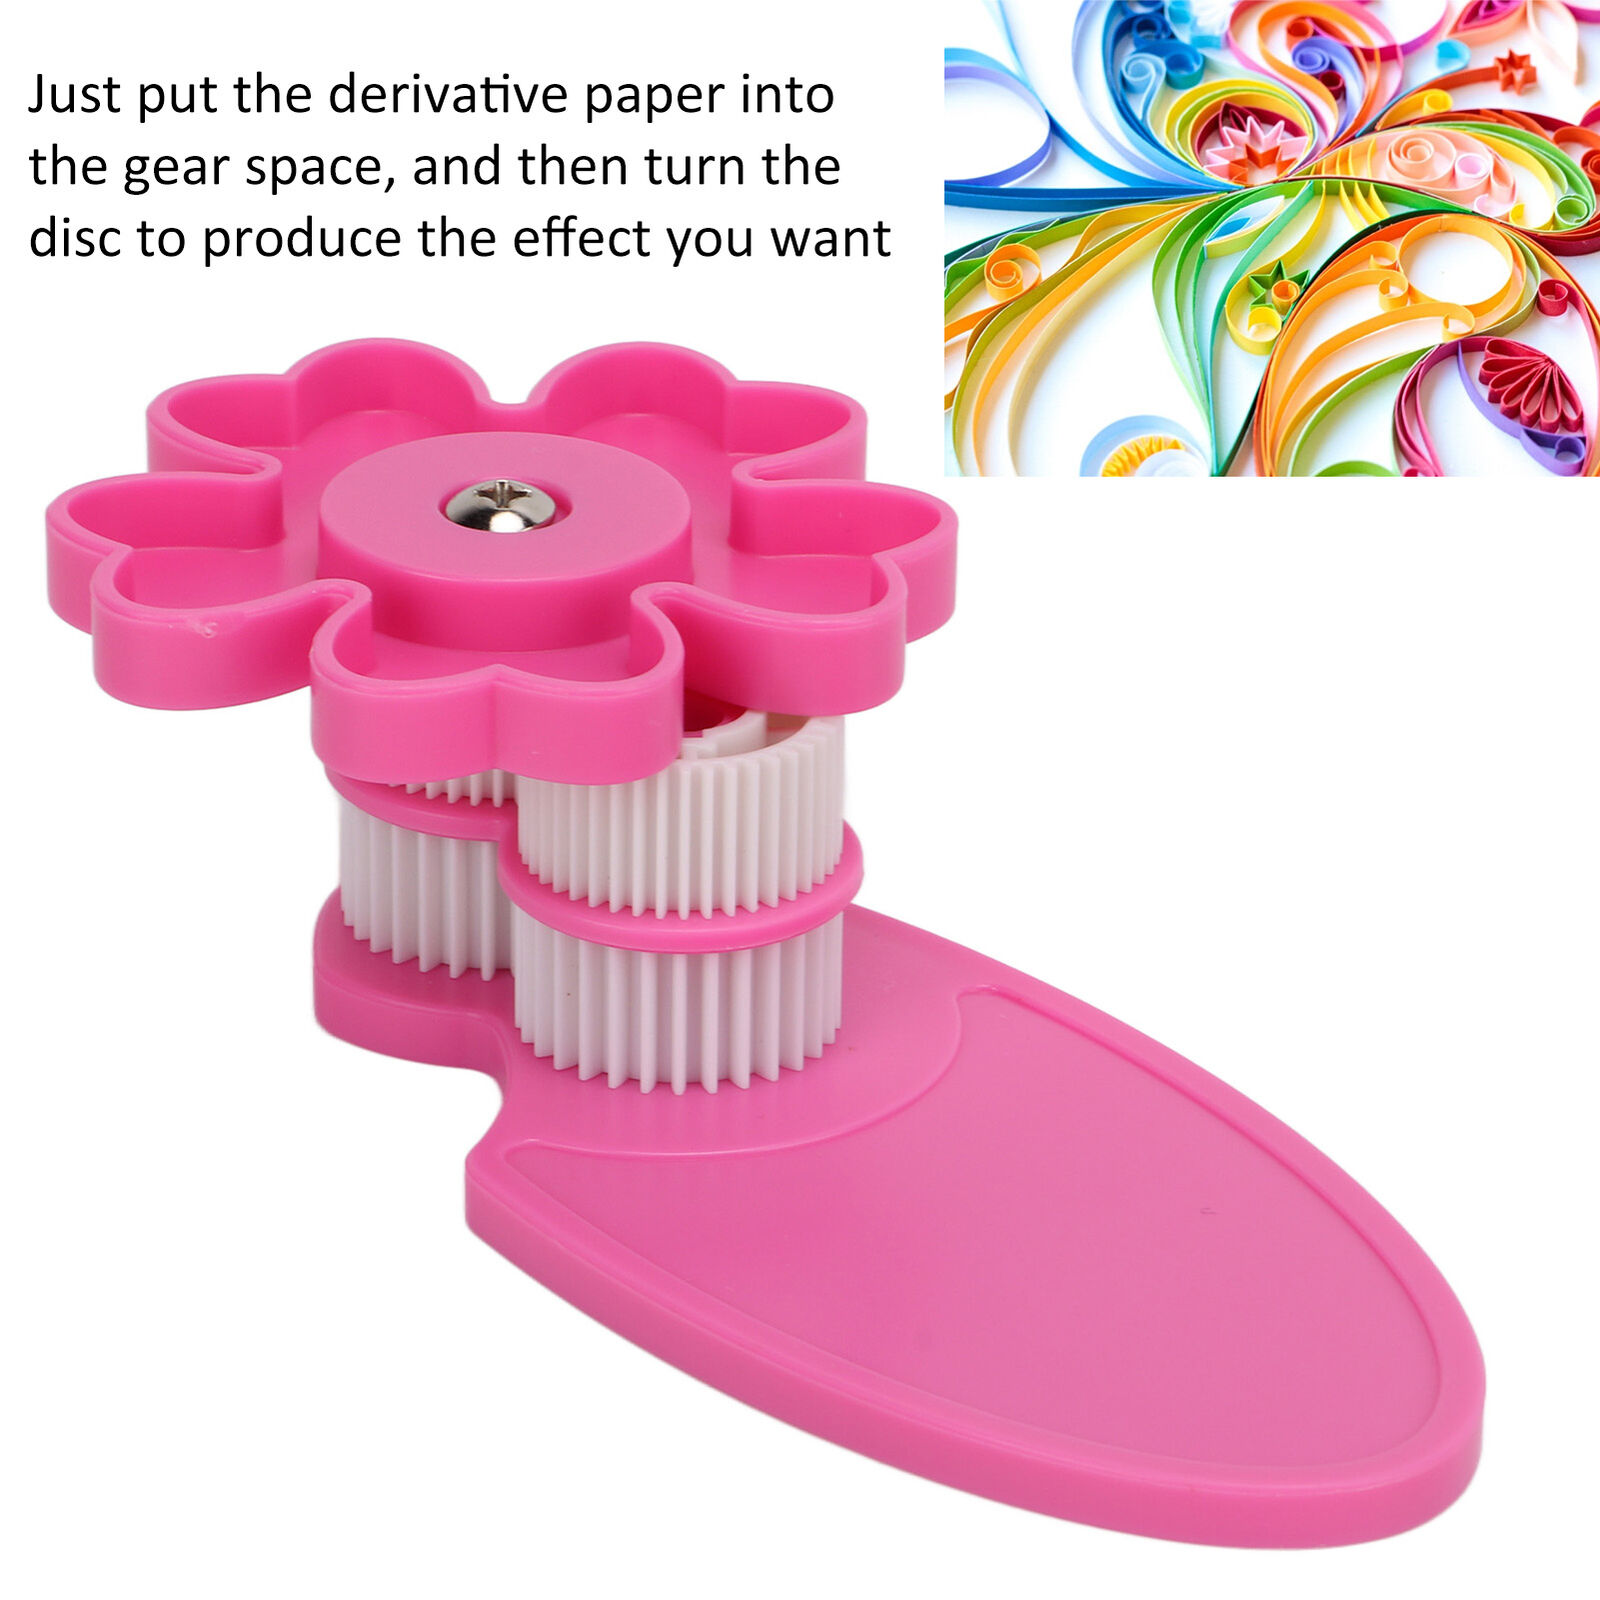 Lurrose Crimper Tool Folding Tool Quilling Tools and Supplies Paper Crimper  for Chip Bags Paper Quilling Kit Manual Paper Crimper DIY Crimping Tool